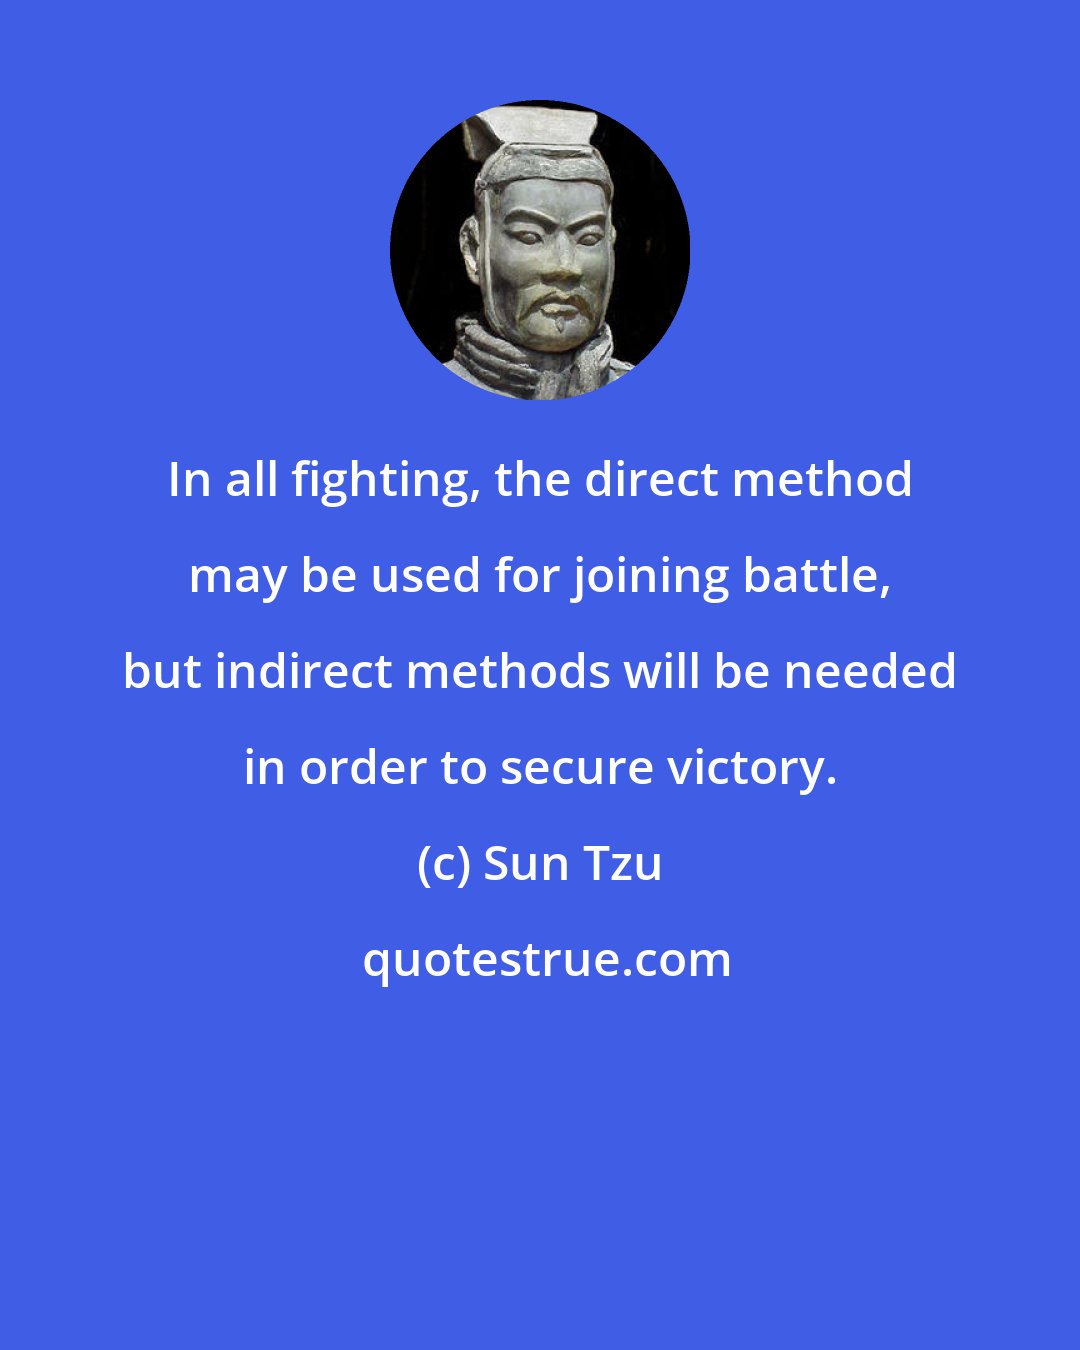 Sun Tzu: In all fighting, the direct method may be used for joining battle, but indirect methods will be needed in order to secure victory.